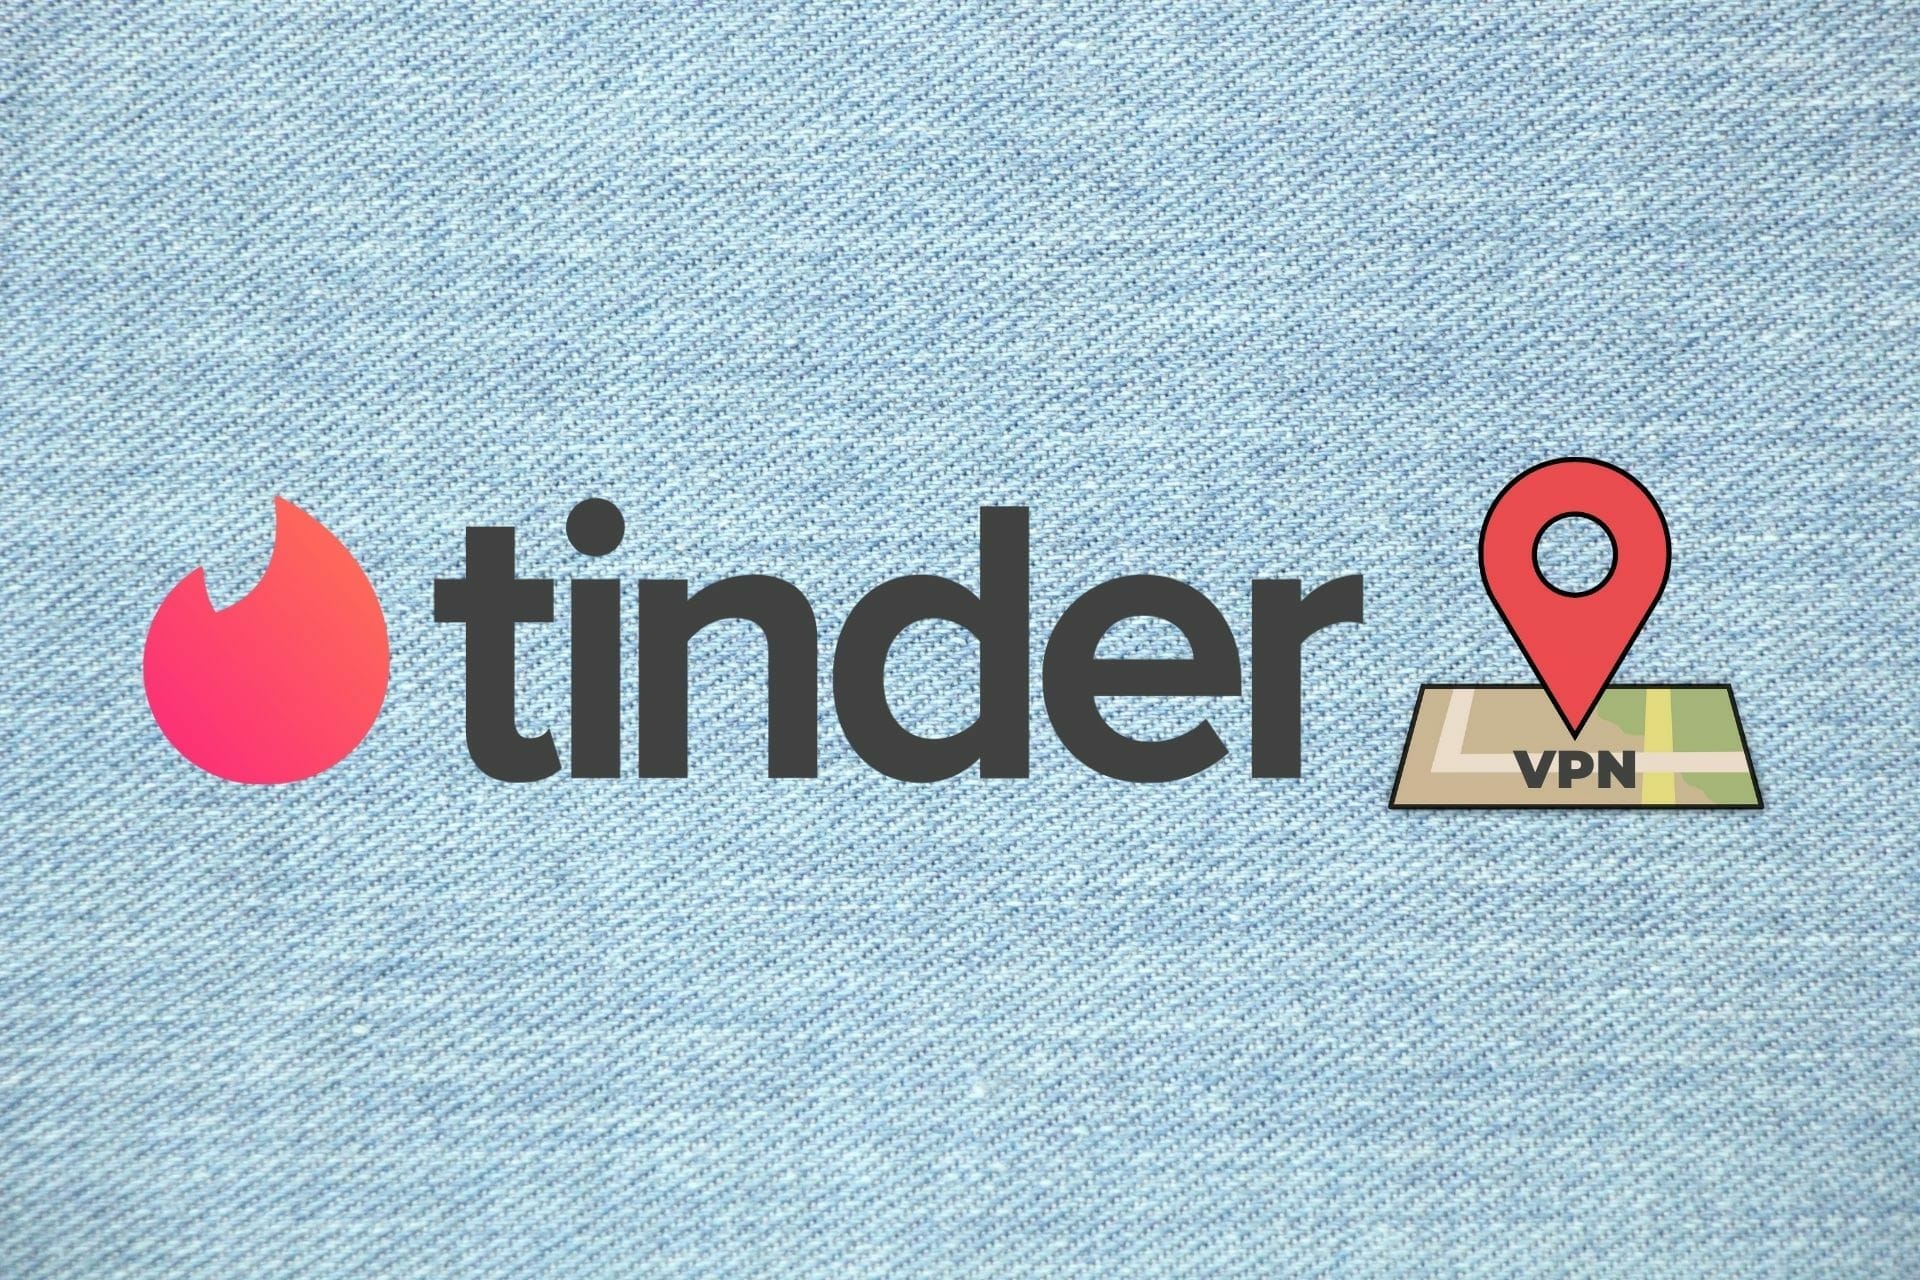 Does tinder update location if not using